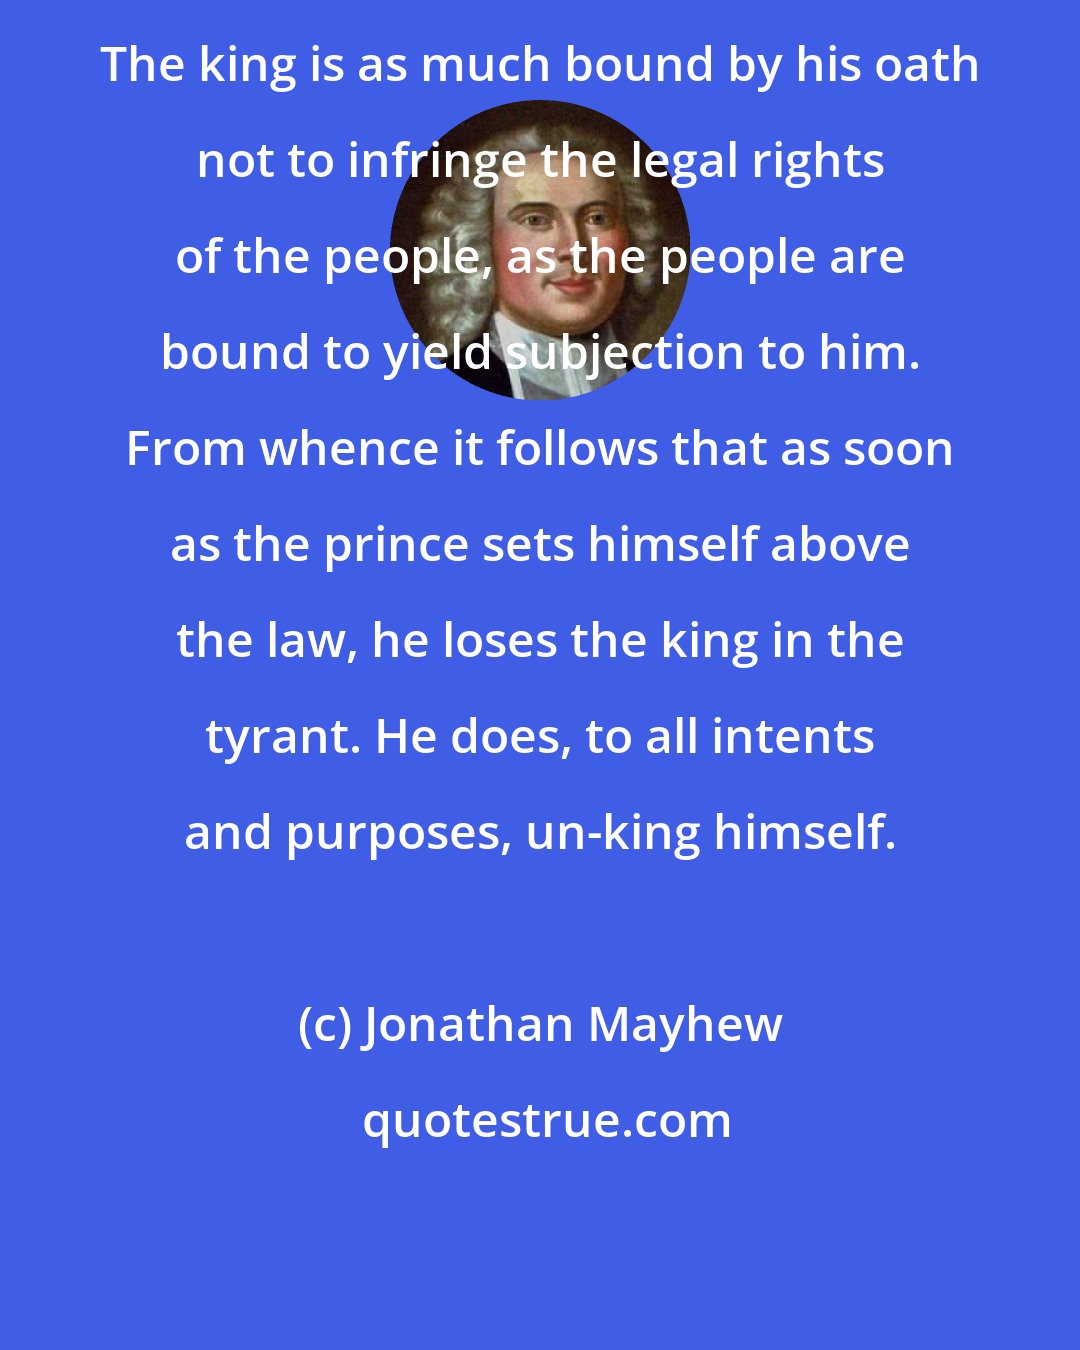 Jonathan Mayhew: The king is as much bound by his oath not to infringe the legal rights of the people, as the people are bound to yield subjection to him. From whence it follows that as soon as the prince sets himself above the law, he loses the king in the tyrant. He does, to all intents and purposes, un-king himself.